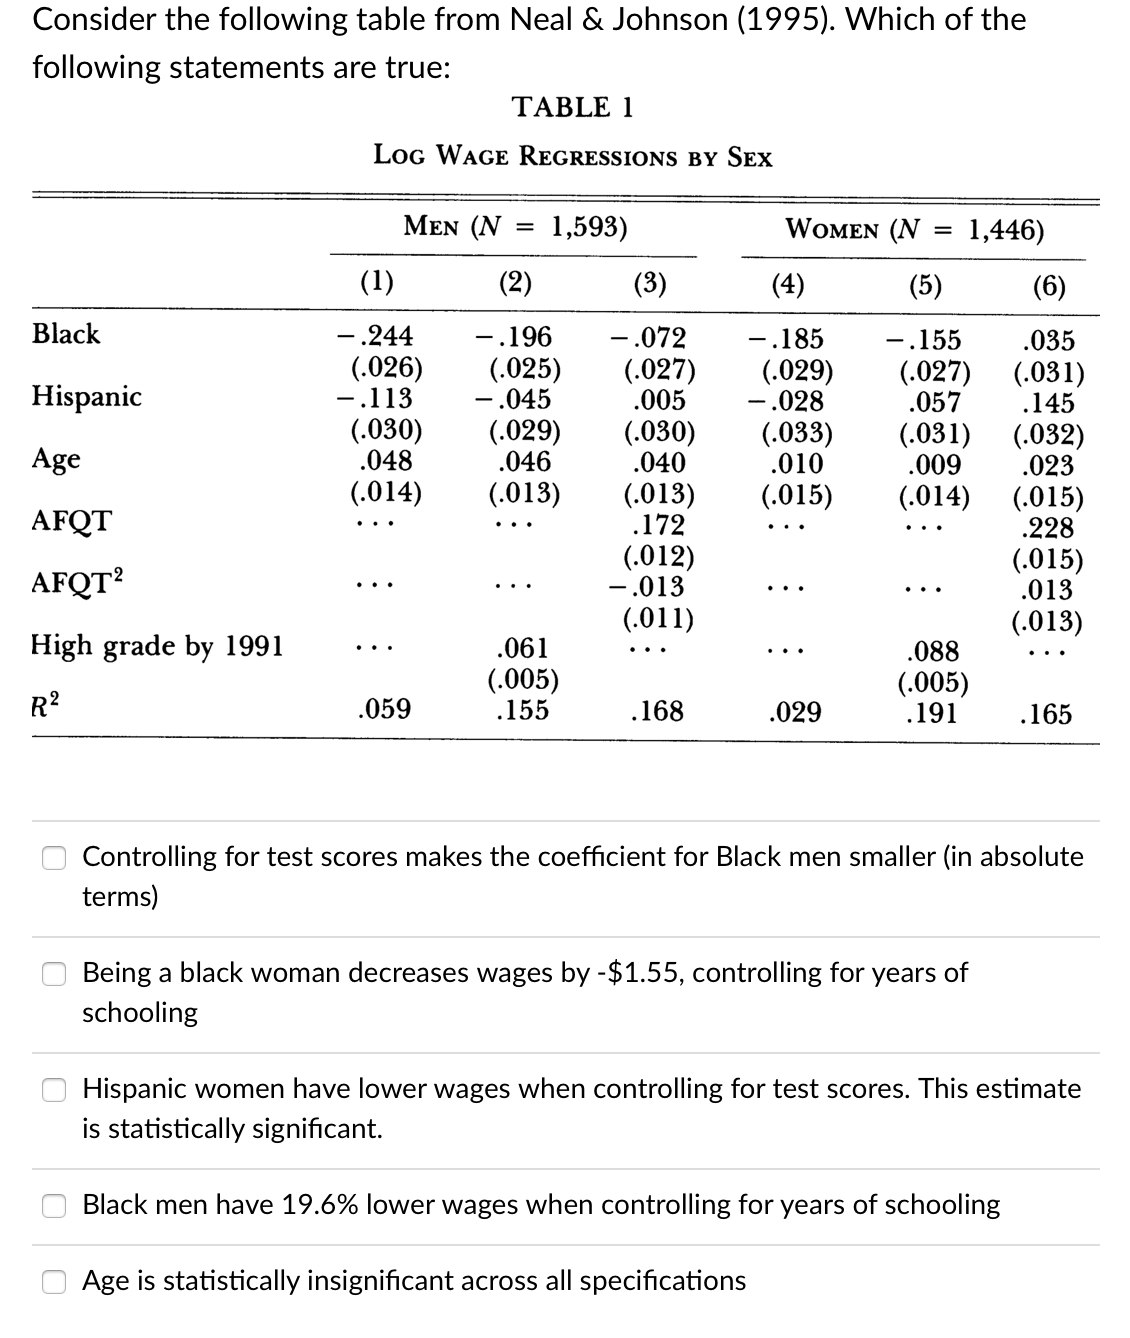 Consider the following table from Neal & Johnson (1995). Which of the
following statements are true:
TABLE 1
LoG WAGE REGRESSIONS BY SEX
MEN (N
1,593)
WOMEN (N
1,446)
(1)
(2)
(3)
(4)
(5)
(6)
Black
-.244
-.196
-.072
-.185
-.155
.035
(.026)
-.113
(.025)
– .045
(.029)
.046
(.027)
.005
(.029)
- .028
(.033)
.010
(.027) (.031)
Hispanic
.057
.145
(.030)
.048
(.030)
.040
(.031)
(.032)
Age
.009
.023
(.014)
(.013)
.172
(.012)
-.013
(.011)
(.013)
(.015)
(.014)
AFQT
(.015)
.228
AFQT?
(.015)
.013
(.013)
High grade by 1991
.061
.088
(.005)
.155
(.005)
.191
R?
.059
.168
.029
.165
Controlling for test scores makes the coefficient for Black men smaller (in absolute
terms)
Being a black woman decreases wages by -$1.55, controlling for years of
schooling
Hispanic women have lower wages when controlling for test scores. This estimate
is statistically significant.
Black men have 19.6% lower wages when controlling for years of schooling
Age is statistically insignificant across all specifications
